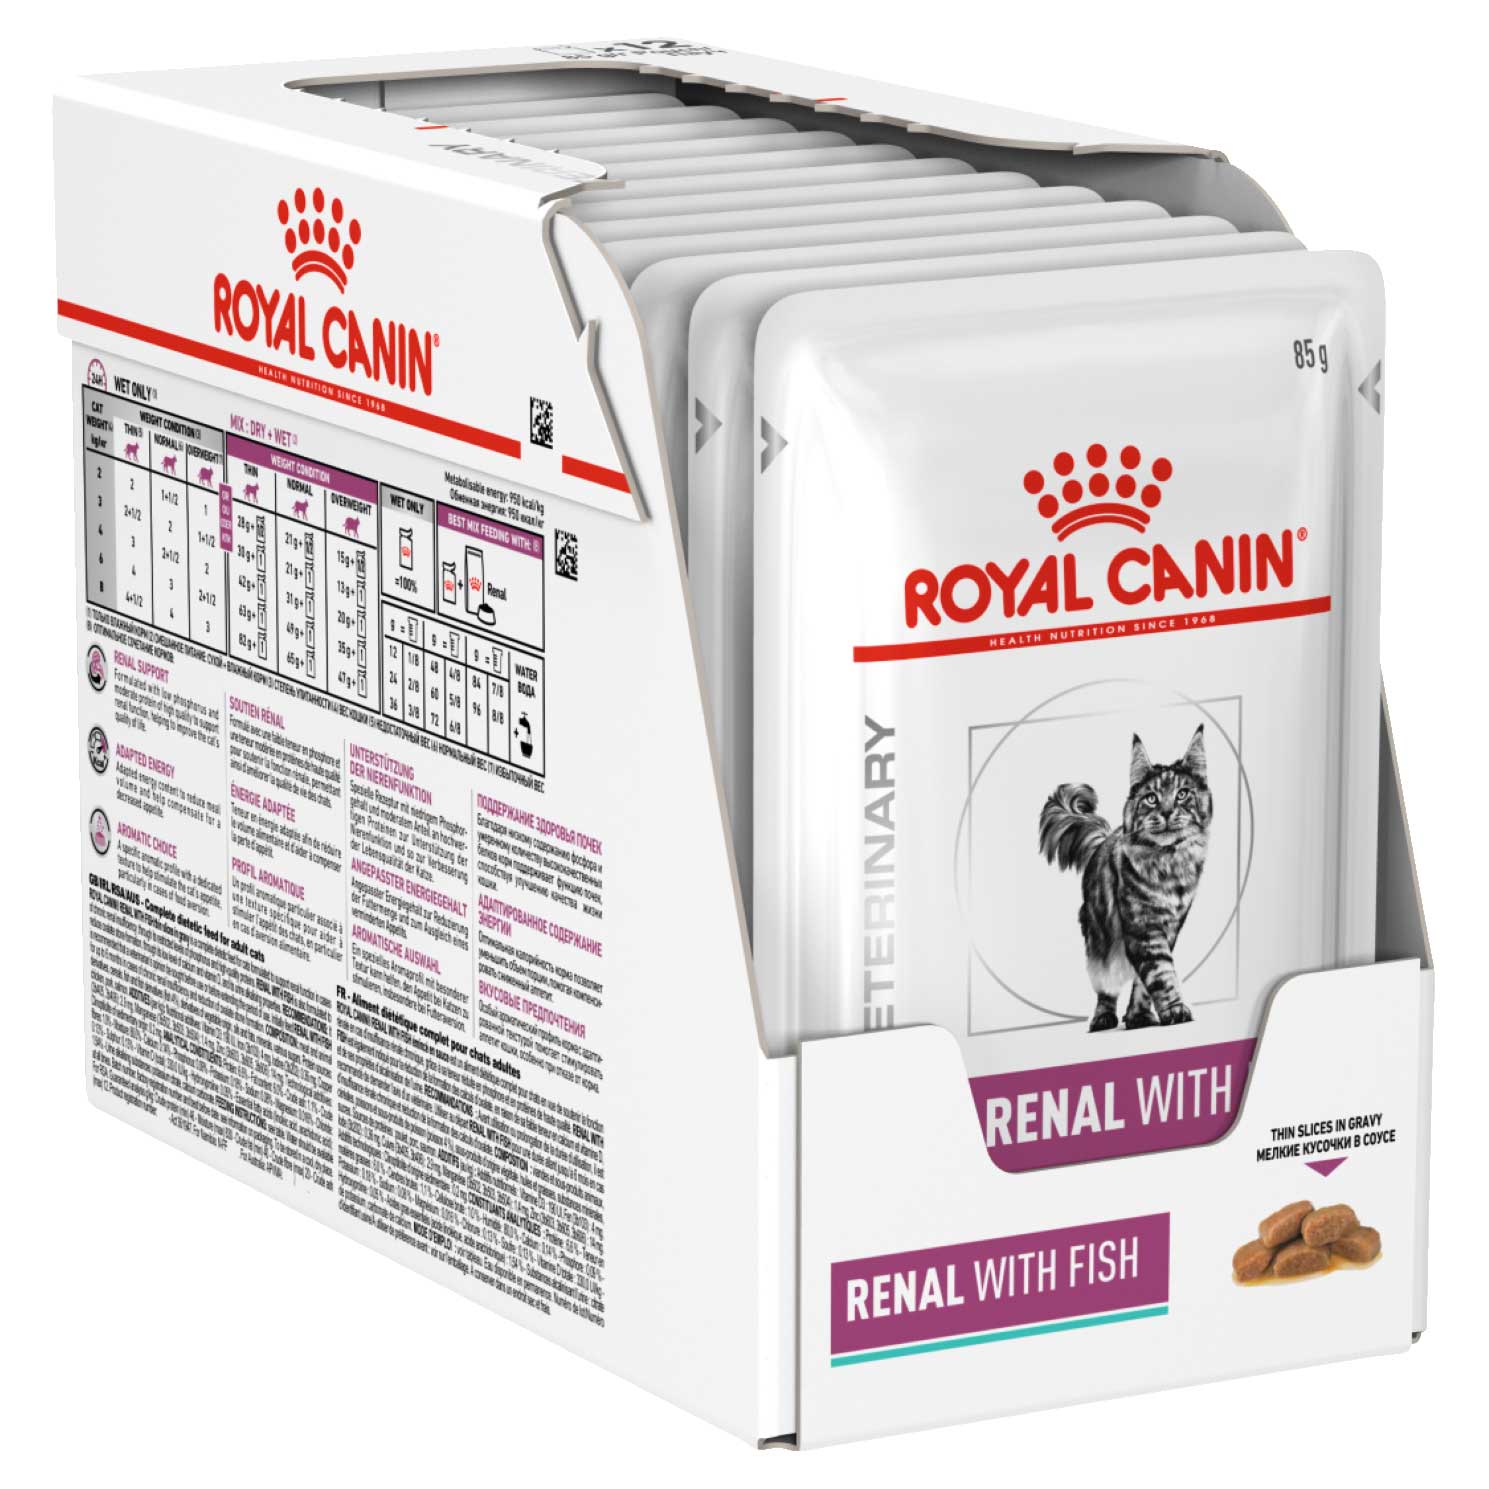 Royal Canin Veterinary Cat Food Pouch Renal with Fish